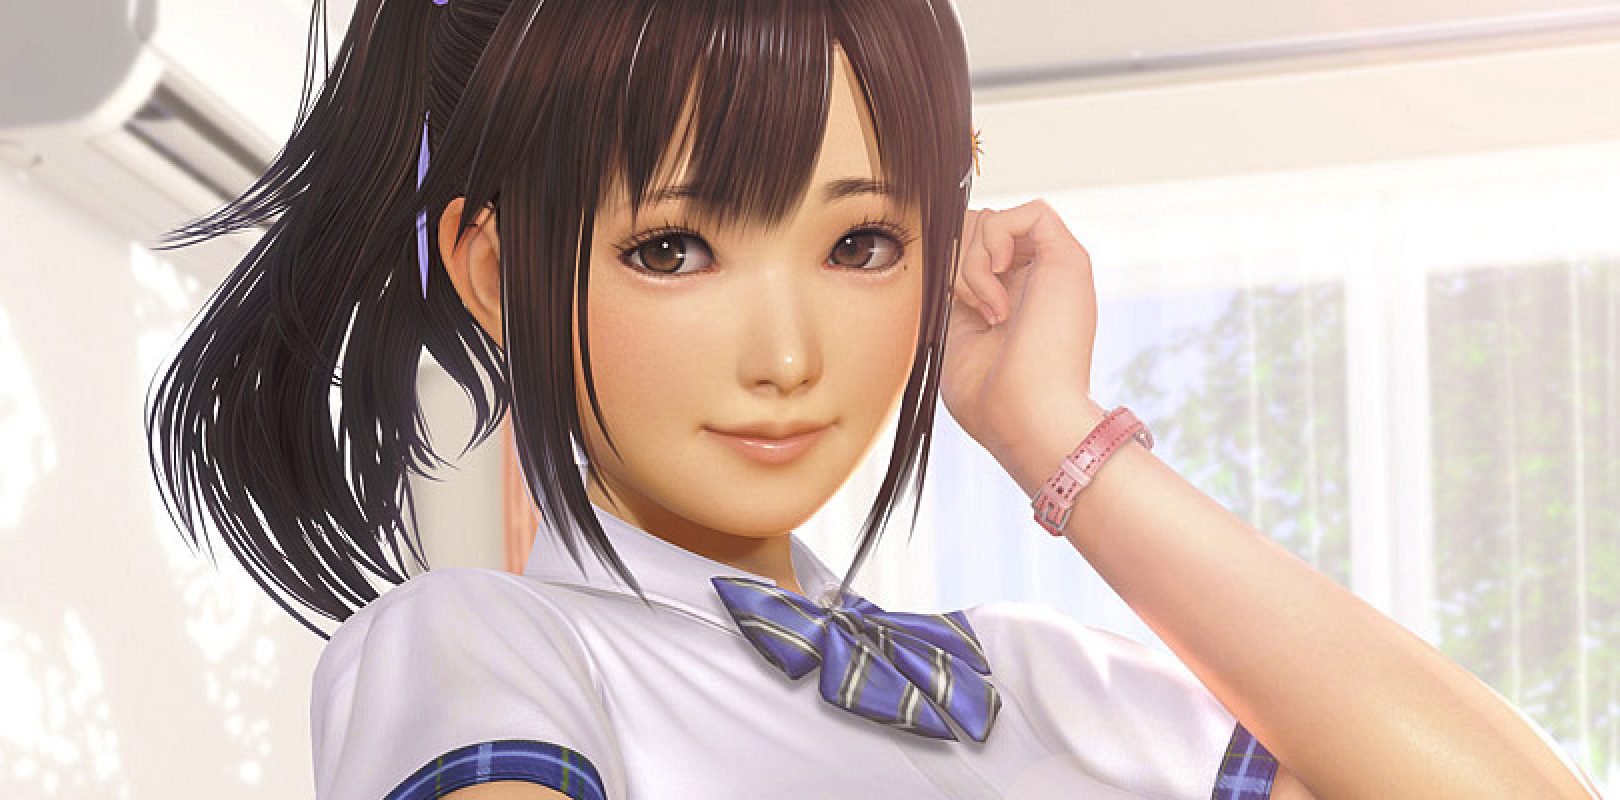 play vr kanojo without hmd